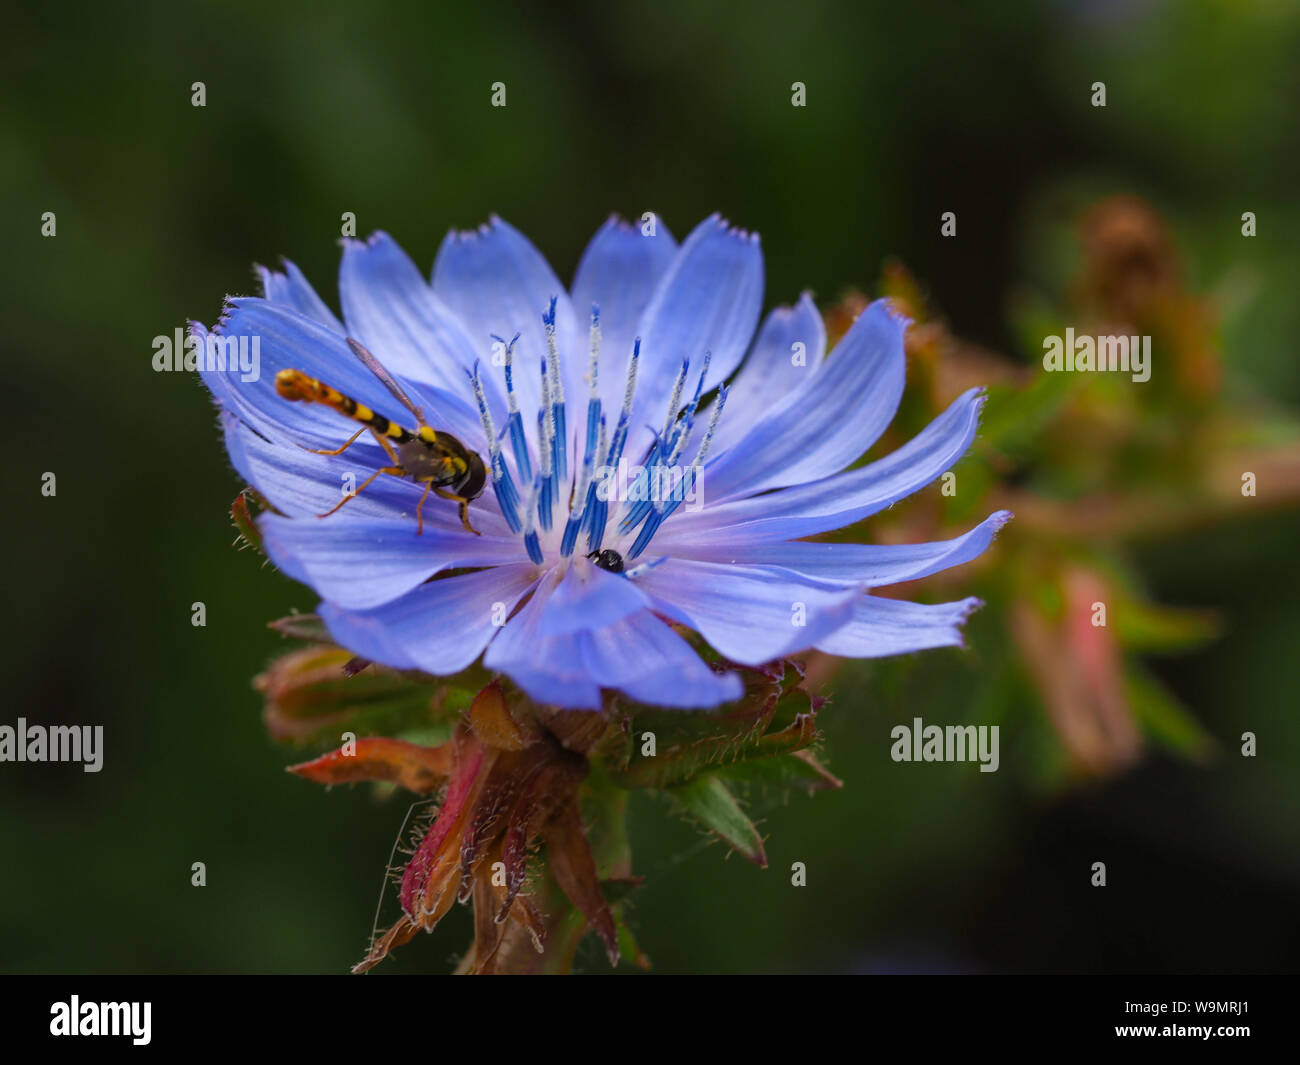 Beautiful blue chicory flower (Cichorium intybus) with a visiting hoverfly Stock Photo